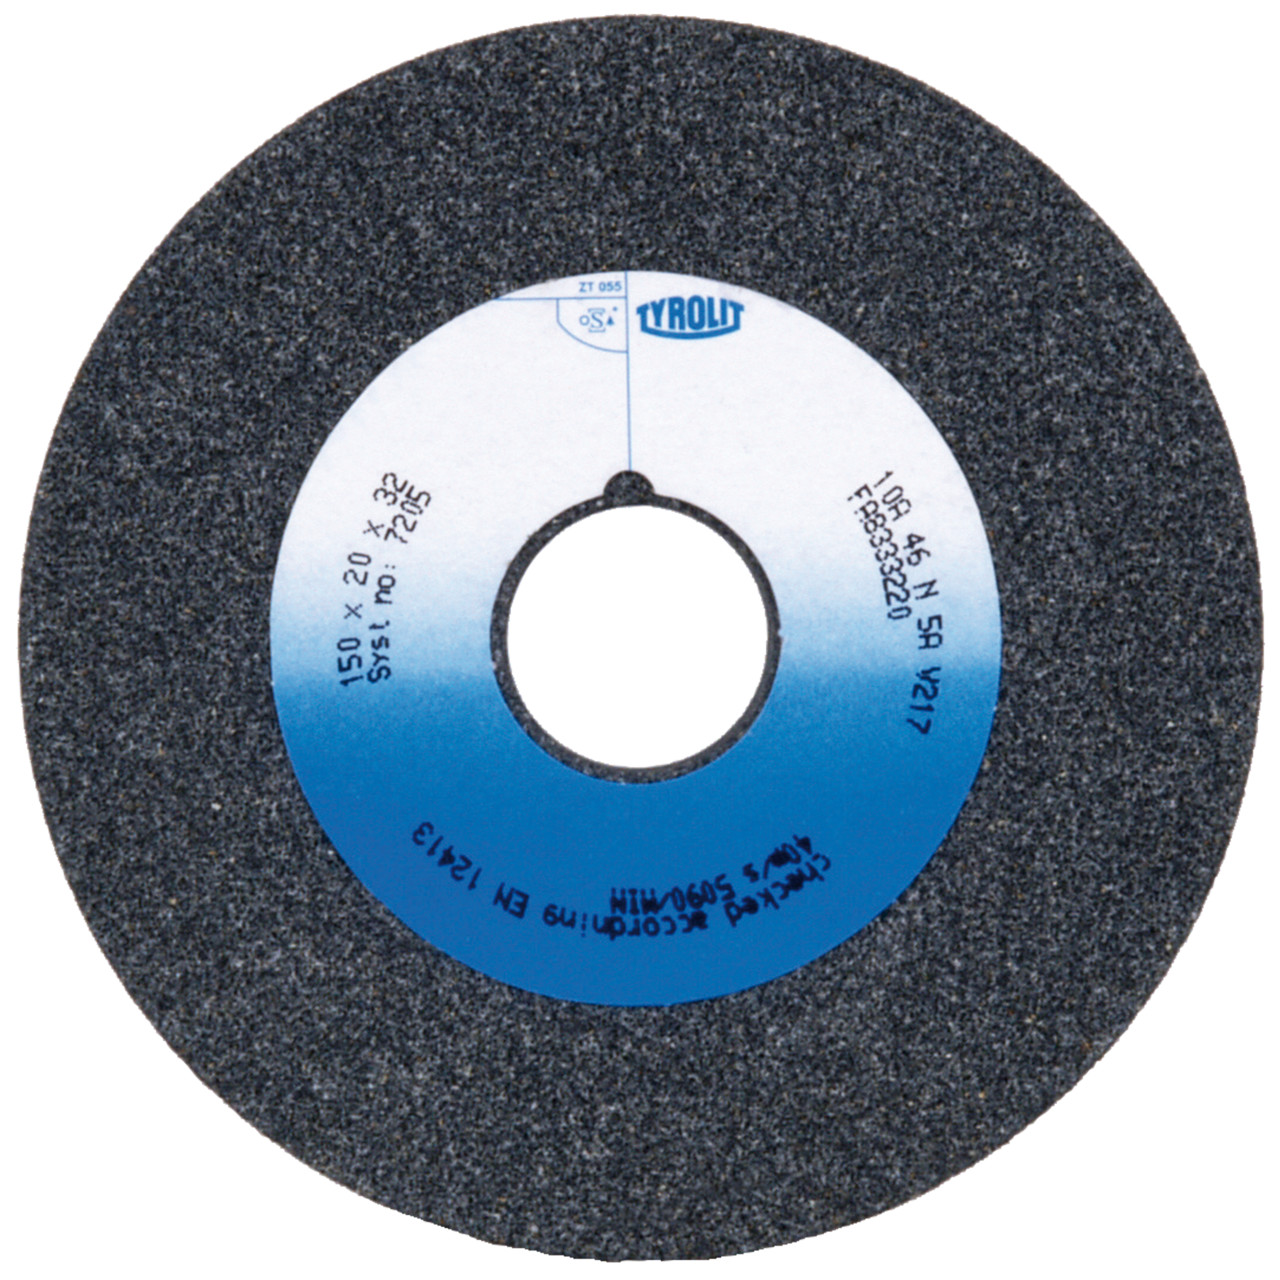 Tyrolit Conventional ceramic grinding discs DxDxH 175x25x51 For unalloyed and low-alloy steels, shape: 1, Art. 68134